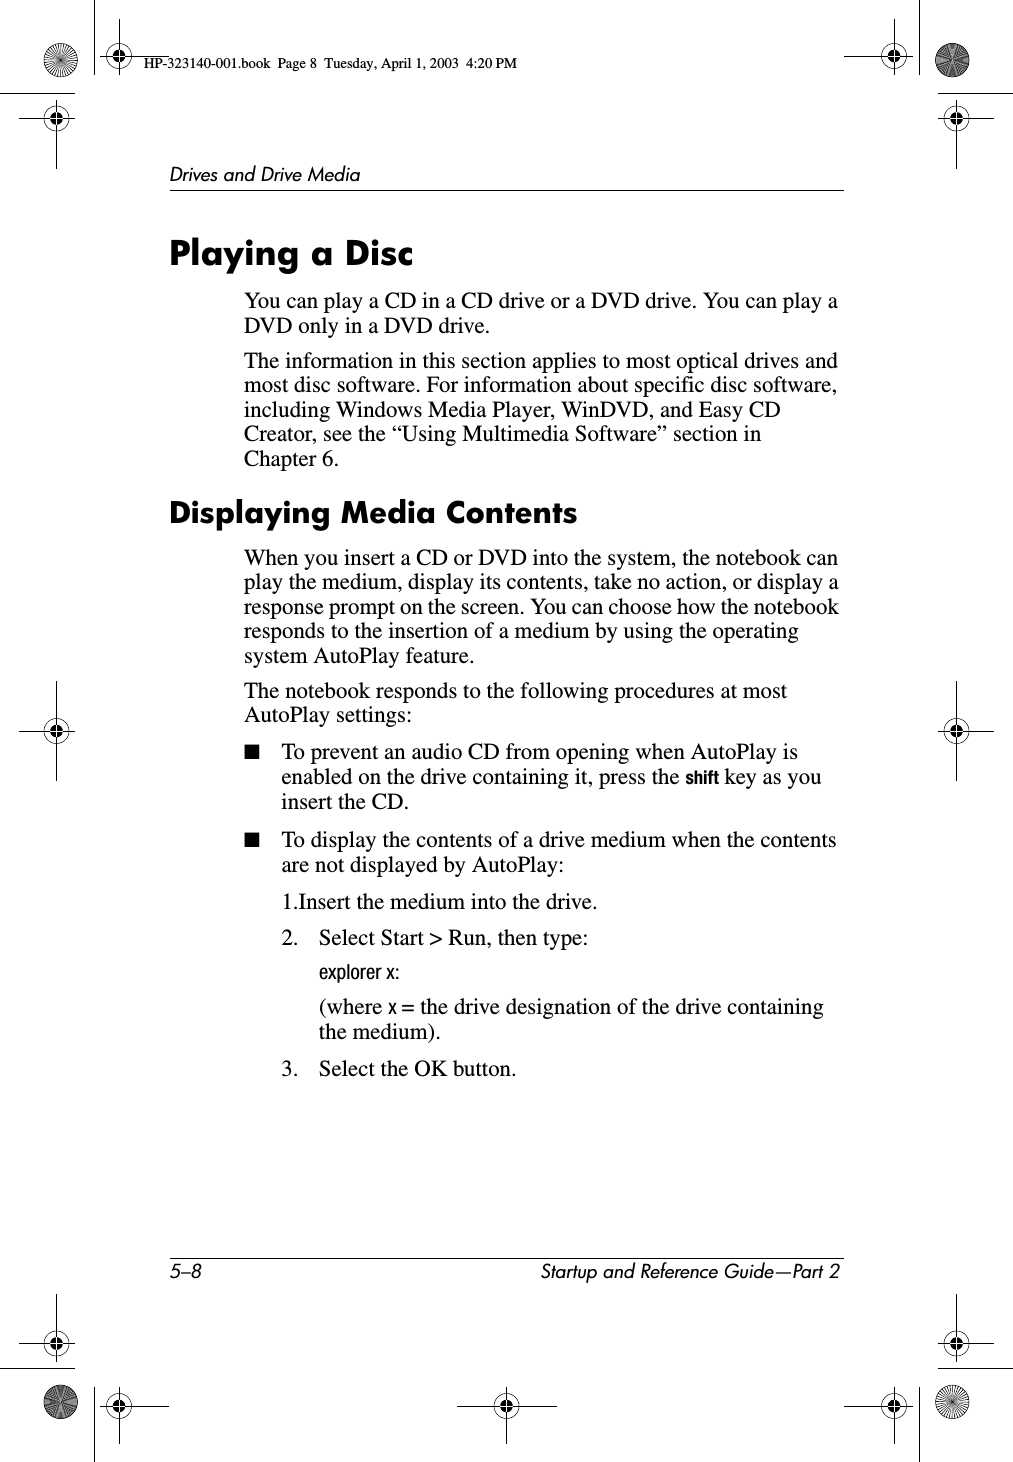 5–8 Startup and Reference Guide—Part 2Drives and Drive MediaPlaying a DiscYou can play a CD in a CD drive or a DVD drive. You can play a DVD only in a DVD drive.The information in this section applies to most optical drives and most disc software. For information about specific disc software, including Windows Media Player, WinDVD, and Easy CD Creator, see the “Using Multimedia Software” section in Chapter 6.Displaying Media ContentsWhen you insert a CD or DVD into the system, the notebook can play the medium, display its contents, take no action, or display a response prompt on the screen. You can choose how the notebook responds to the insertion of a medium by using the operating system AutoPlay feature. The notebook responds to the following procedures at most AutoPlay settings:■To prevent an audio CD from opening when AutoPlay is enabled on the drive containing it, press the shift key as you insert the CD.■To display the contents of a drive medium when the contents are not displayed by AutoPlay:1.Insert the medium into the drive.2. Select Start &gt; Run, then type:explorer x:(where x= the drive designation of the drive containing the medium).3. Select the OK button.HP-323140-001.book  Page 8  Tuesday, April 1, 2003  4:20 PM